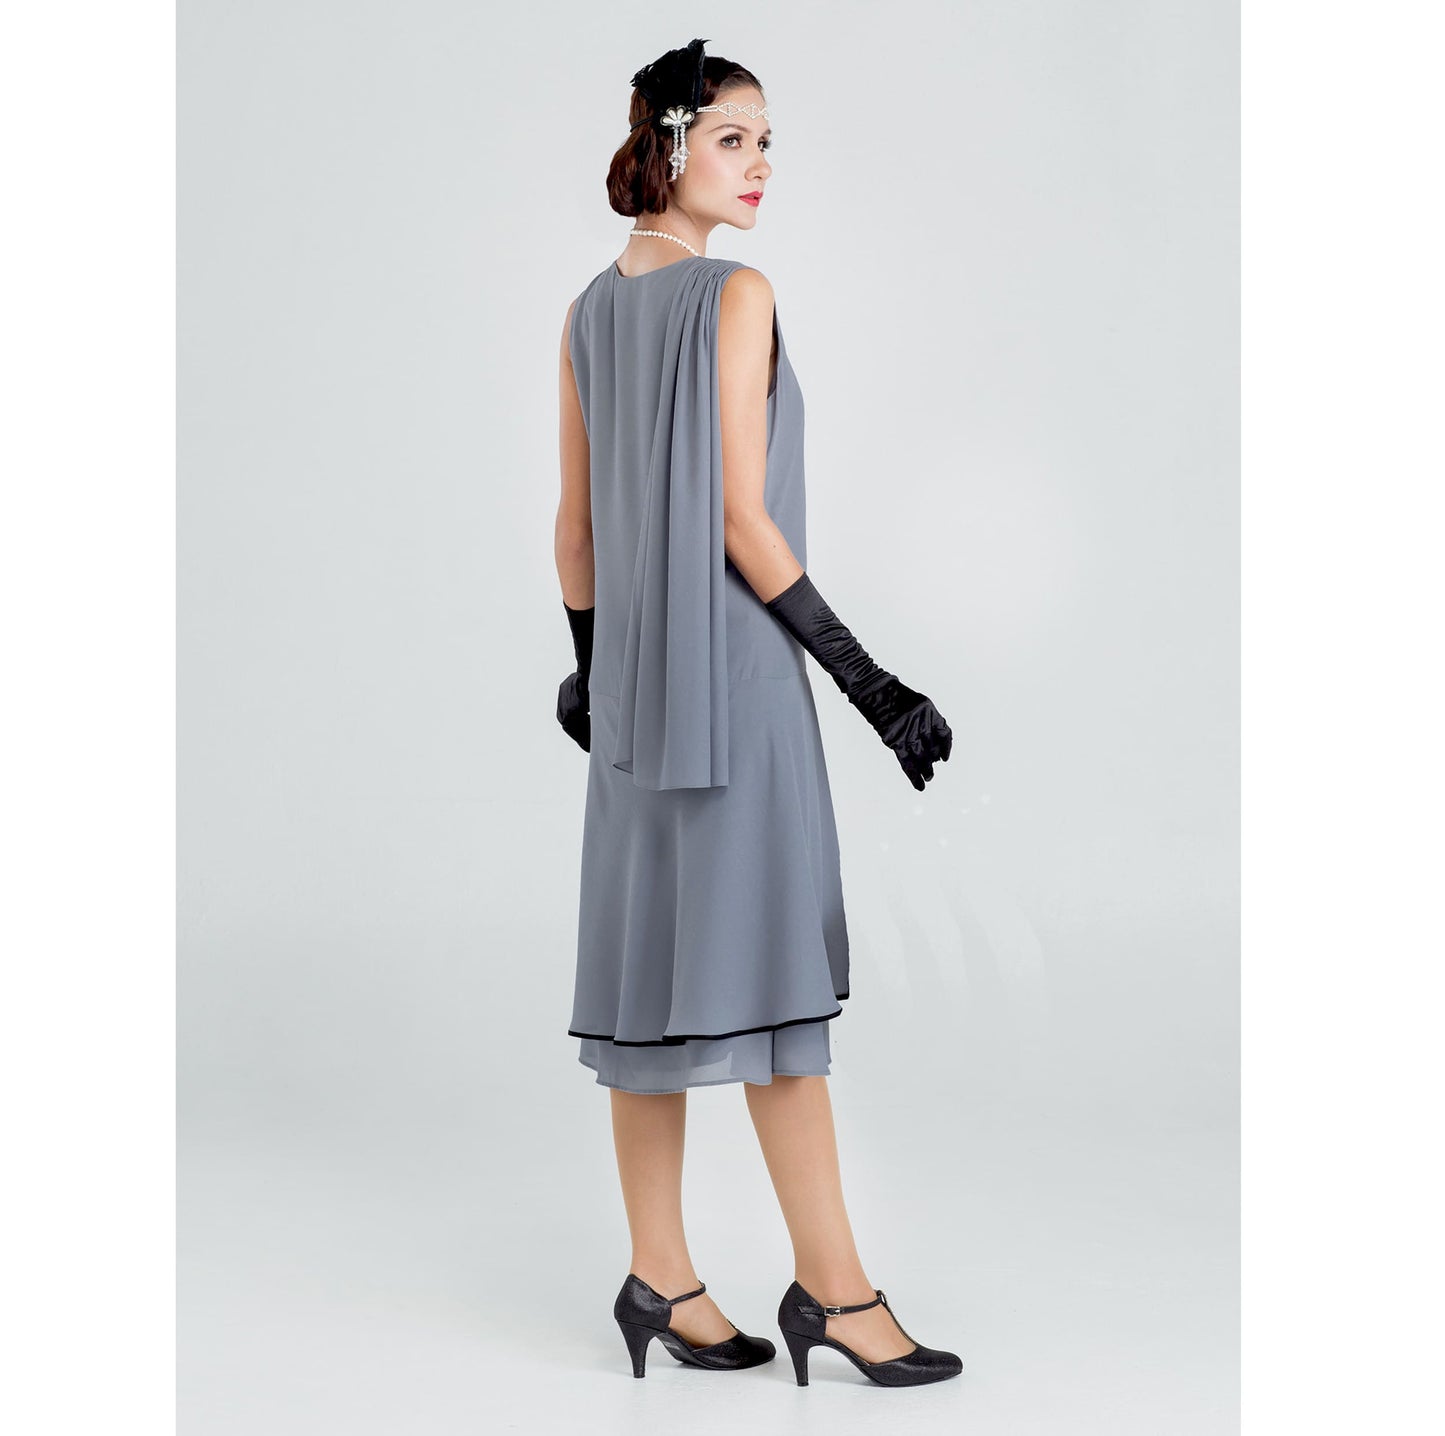 1920s party dress in grey with floral embroidery